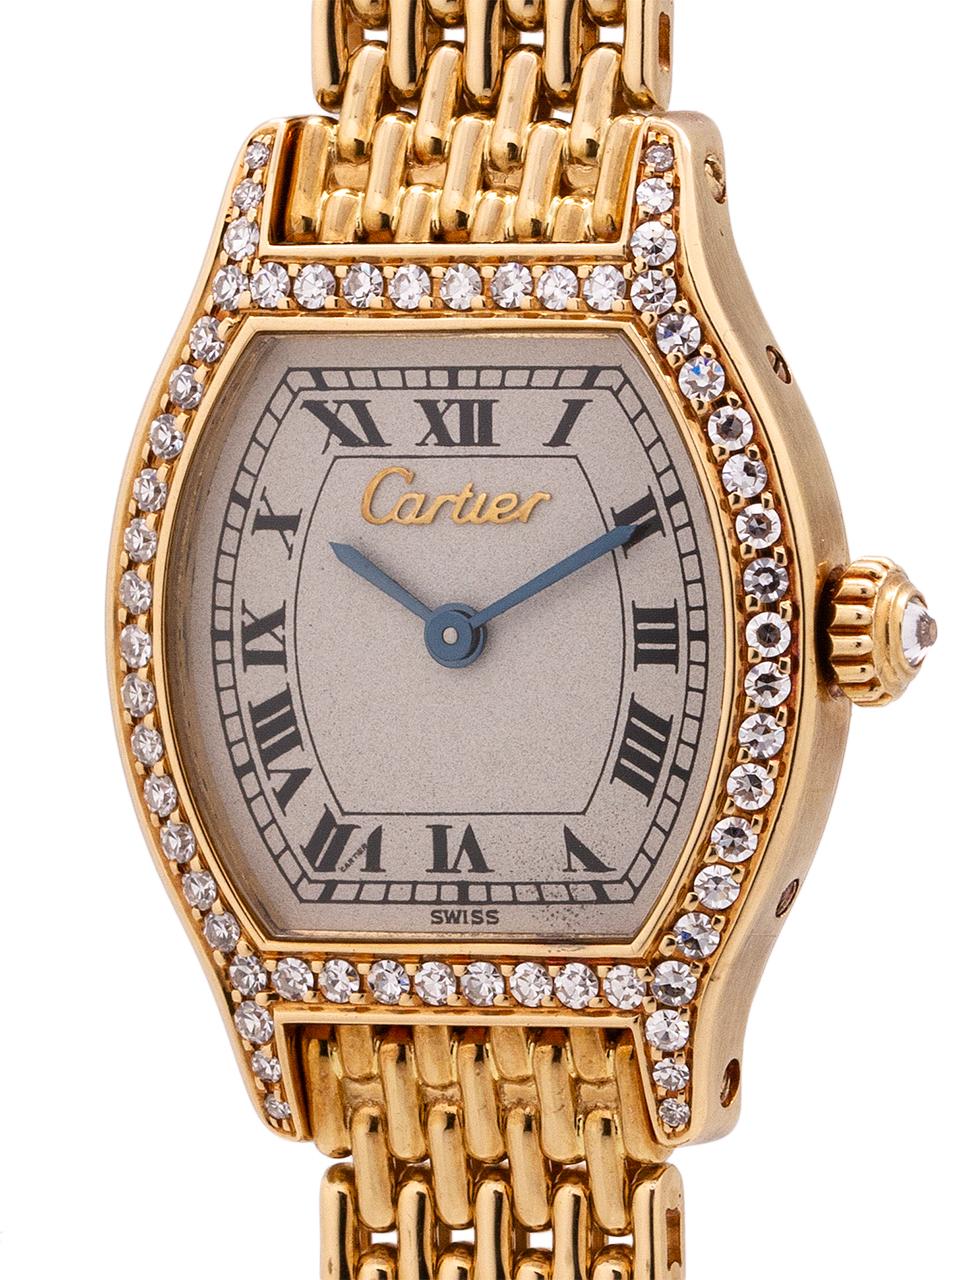 
A stunning lady’s Cartier Tortue in 18K yellow gold with elegant factory diamond set bezel and crown. Featuring a petite 20 x 27mm curved, tortoise shaped case, with slightly curved sapphire crystal, and classic Cartier diamond set crown., The